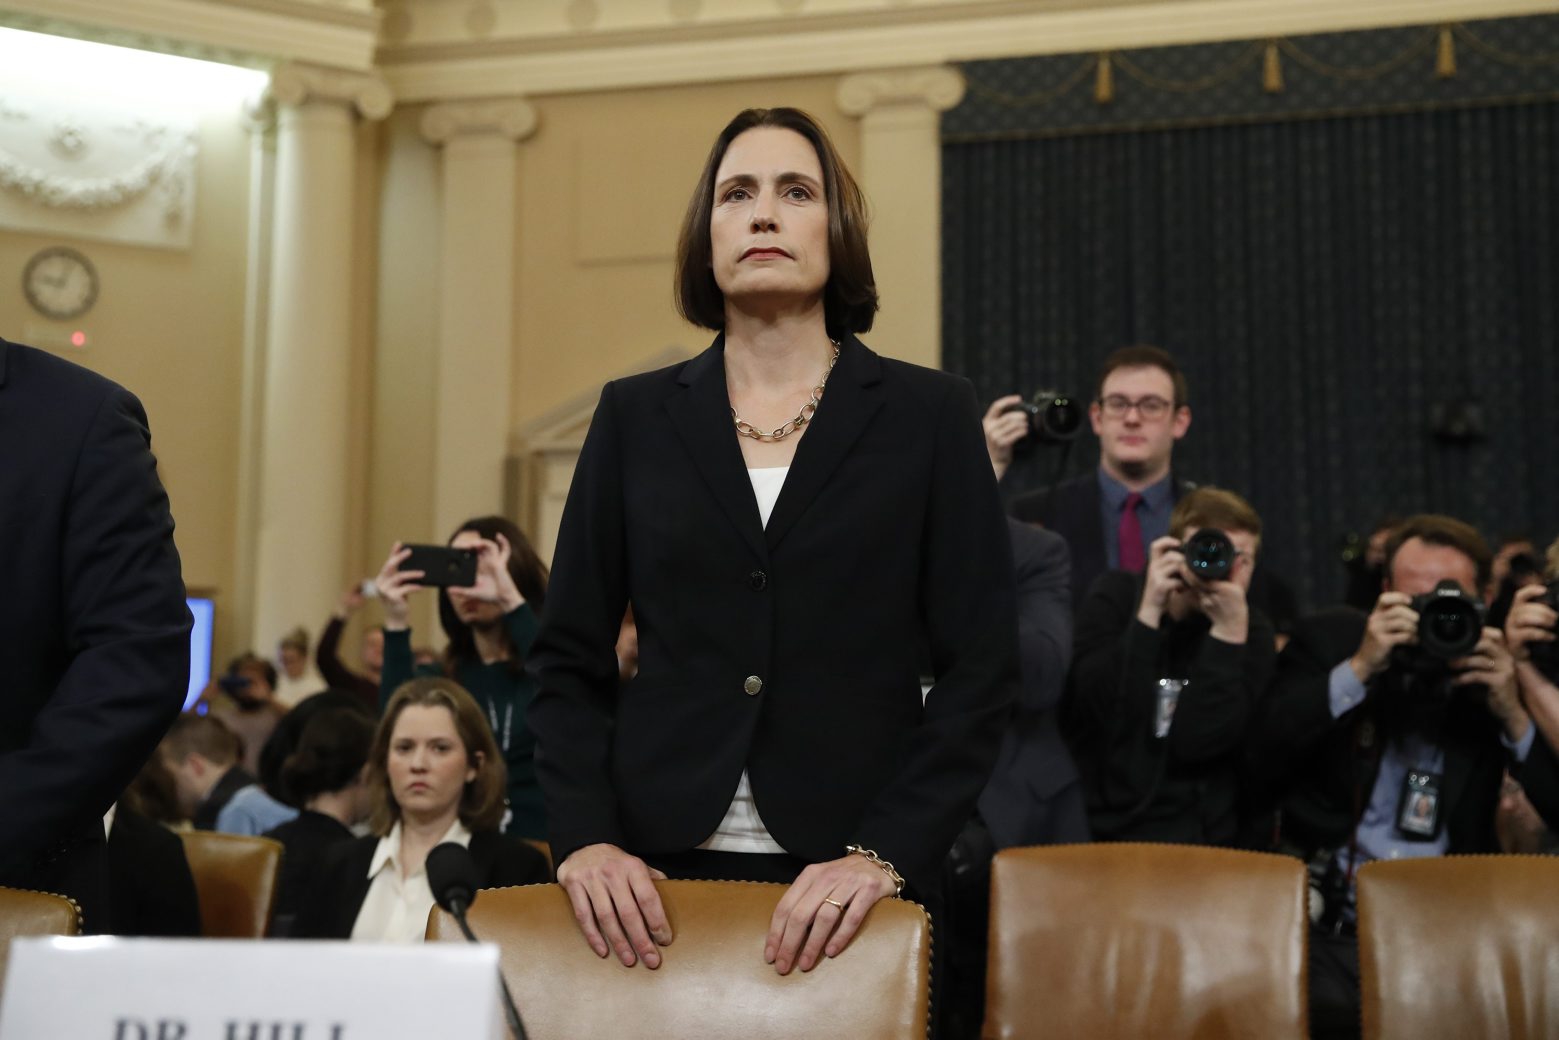 Former White House national security aide Fiona Hill, arrives to testify before the House Intelligence Committee on Capitol Hill in Washington, Thursday, Nov. 21, 2019, during a public impeachment hearing of President Donald Trump's efforts to tie U.S. aid for Ukraine to investigations of his political opponents. (AP Photo/Alex Brandon)
Fiona Hill,David Holmes Trump Impeachment